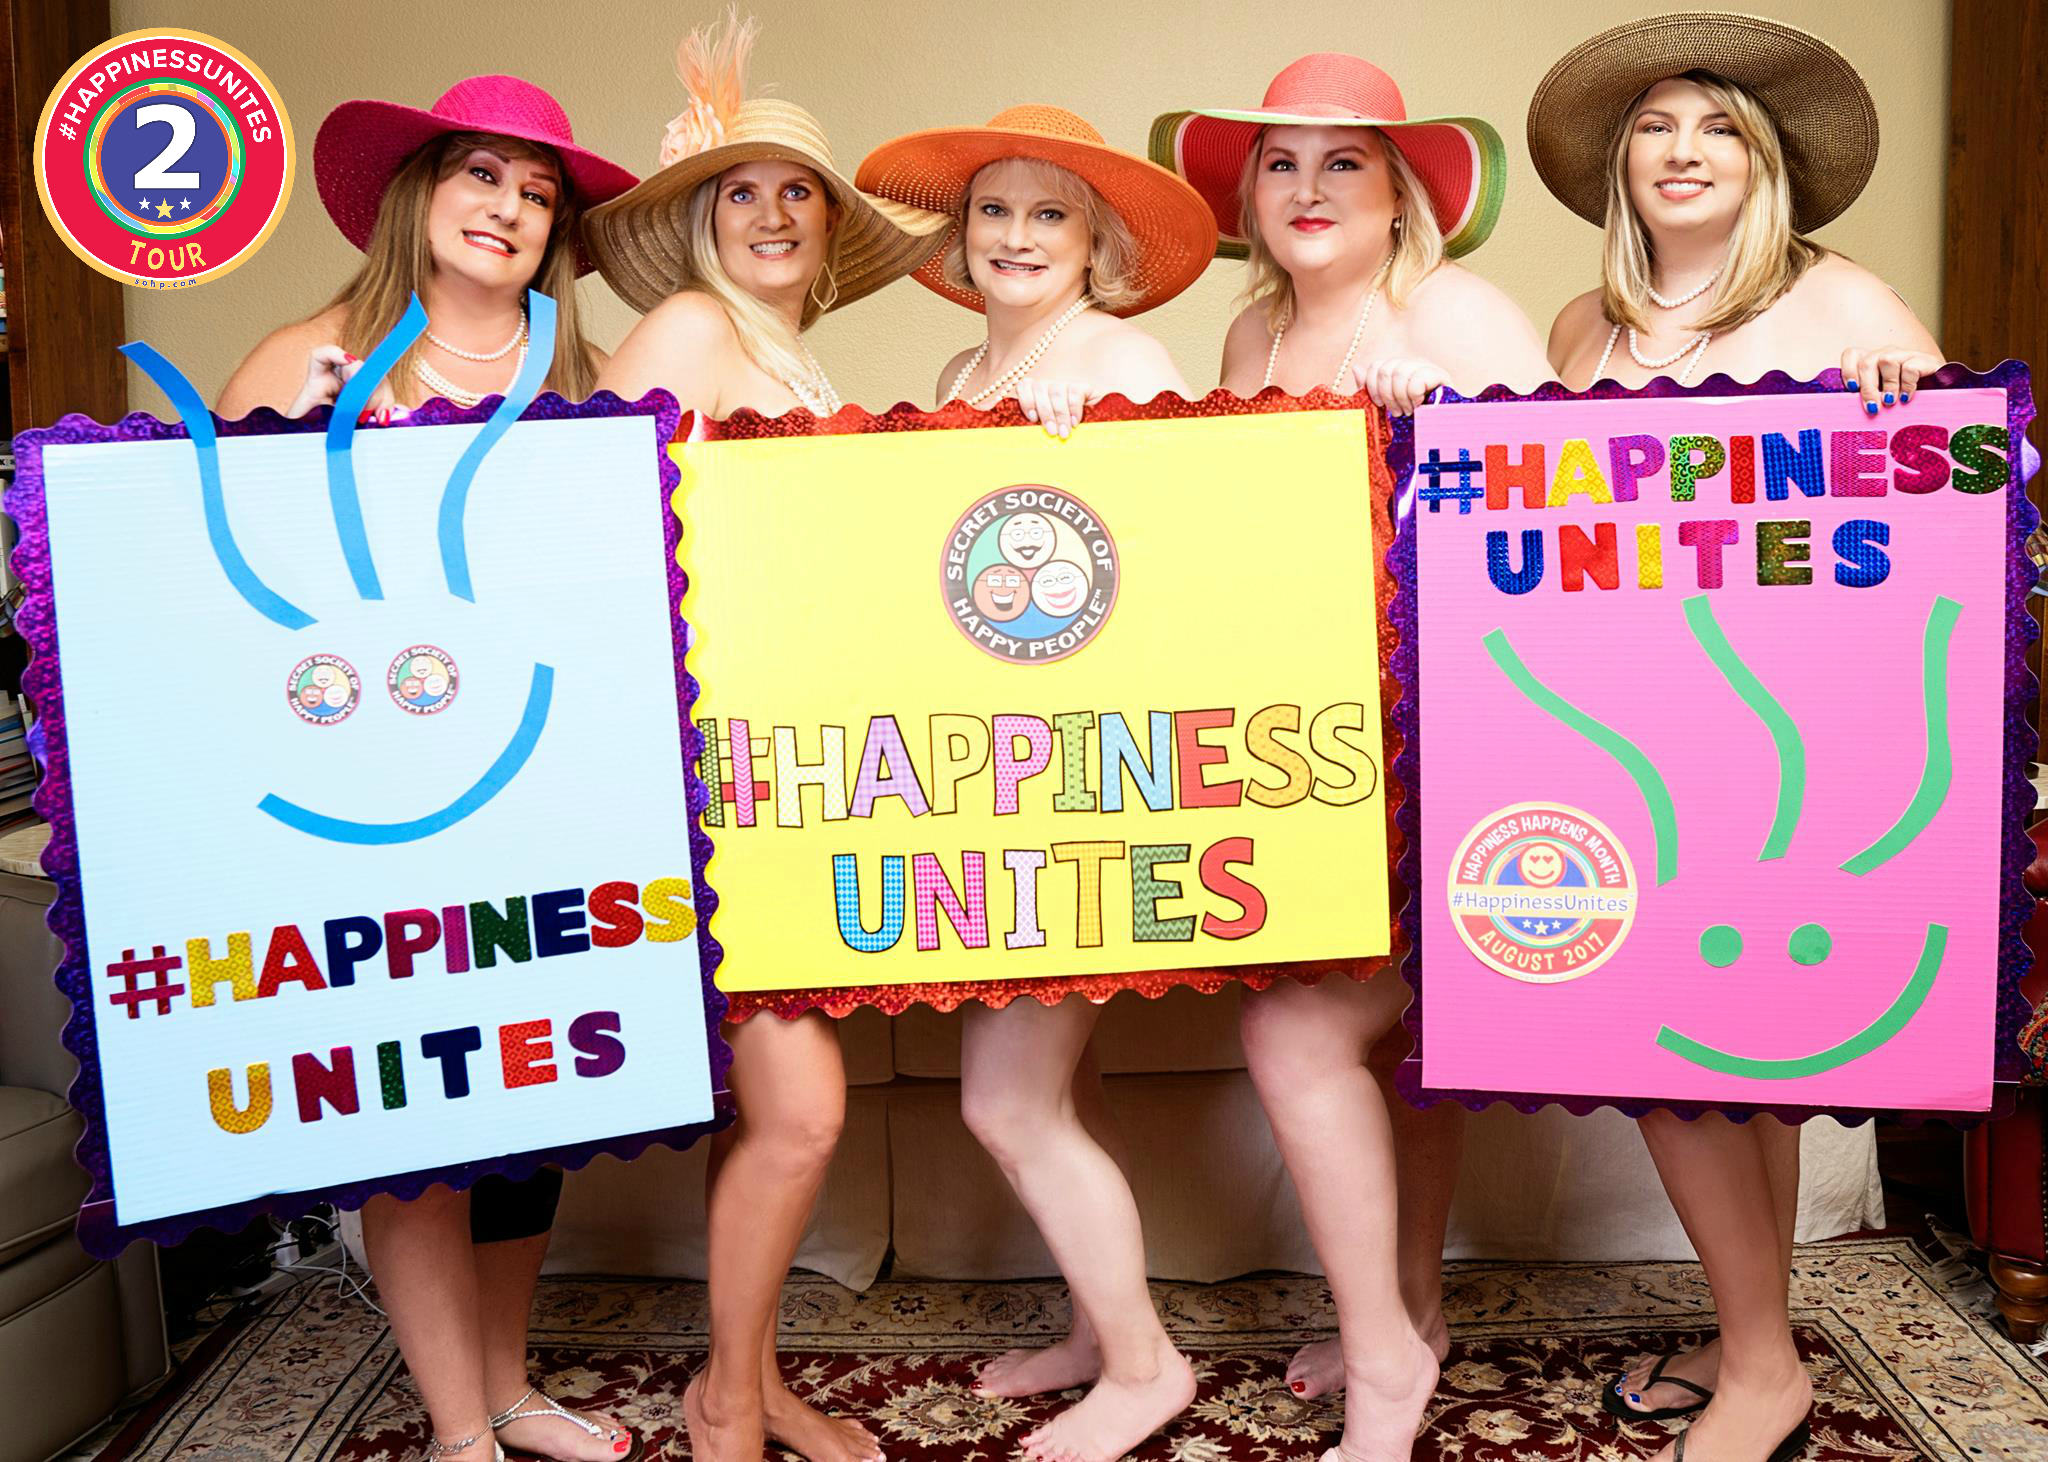 HappinessUnites Tour, Happiness Happens Month, #HappinessUnites, Secret Society of Happy People, SOHP.com, Pamela Gail Johnson, Amarillo TX, Silly Friends, Having Fun With Friends, Calendar Girls